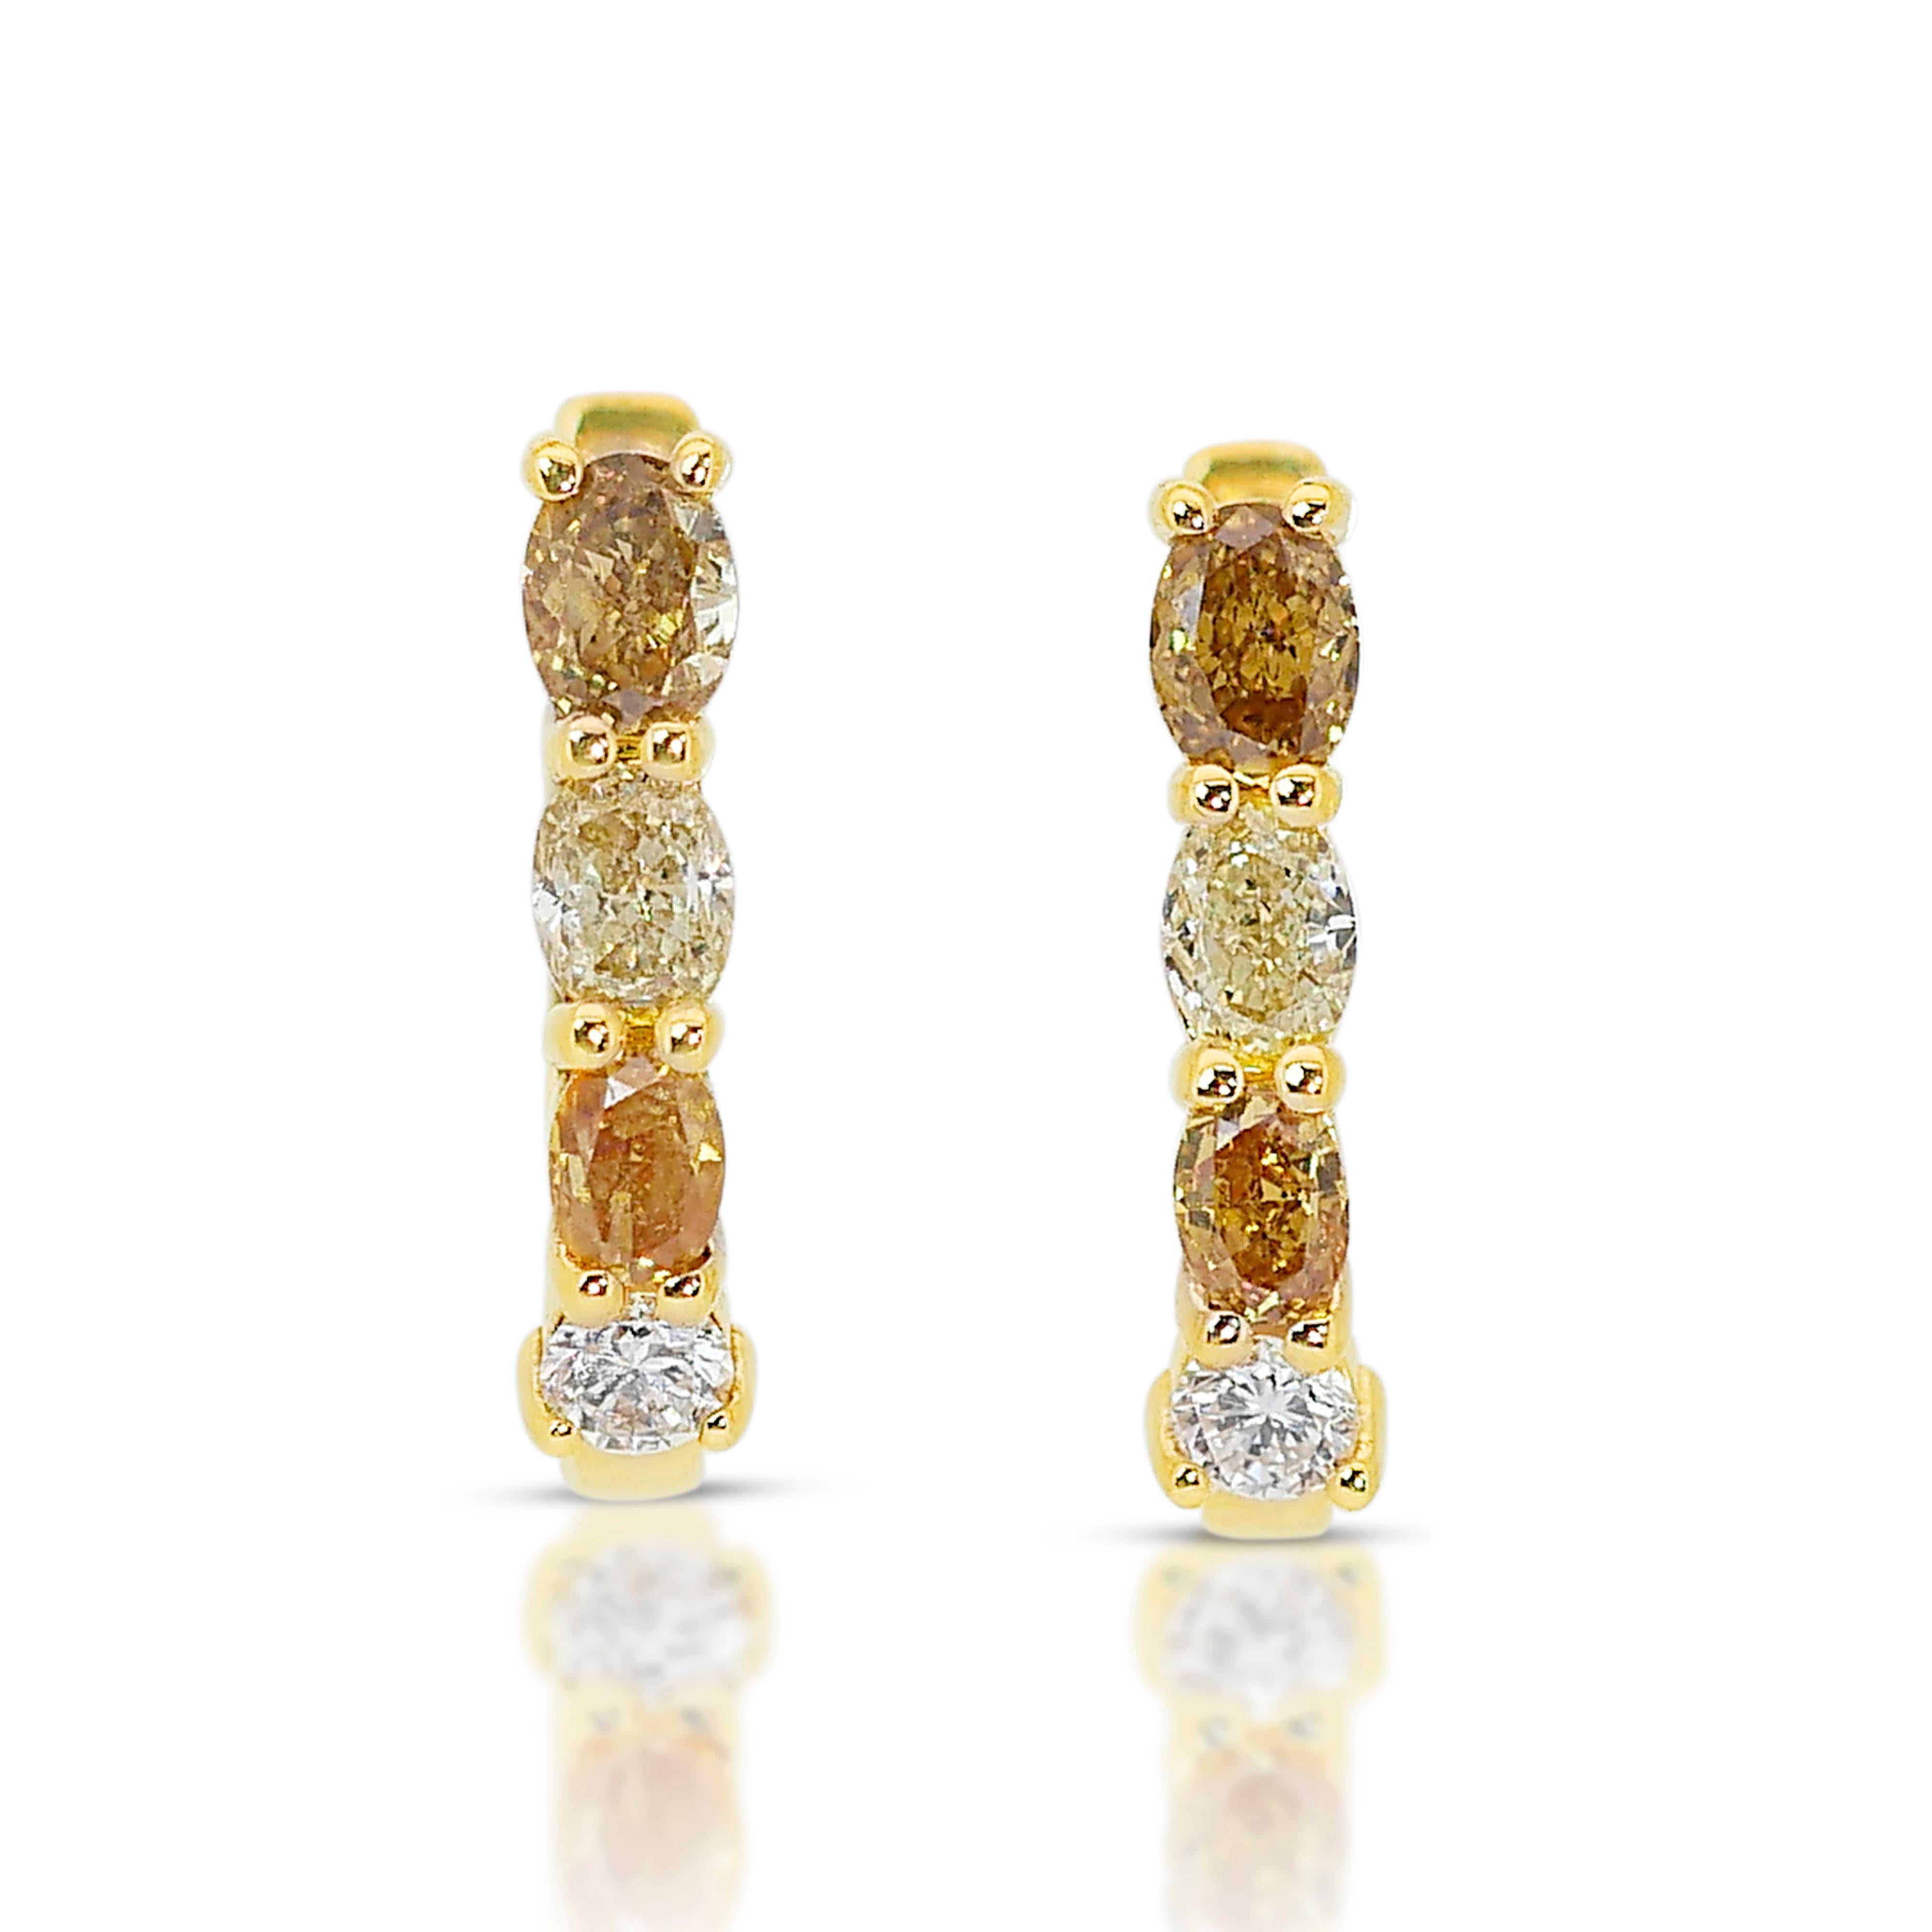 Radiant 1.44 ct Fancy Colored Diamond Earrings in 18k Yellow Gold - IGI Certified

Introducing our radiant fancy-colored diamond earrings, a captivating creation that embodies luxury, color, and light. Crafted from the finest 18k yellow gold. 